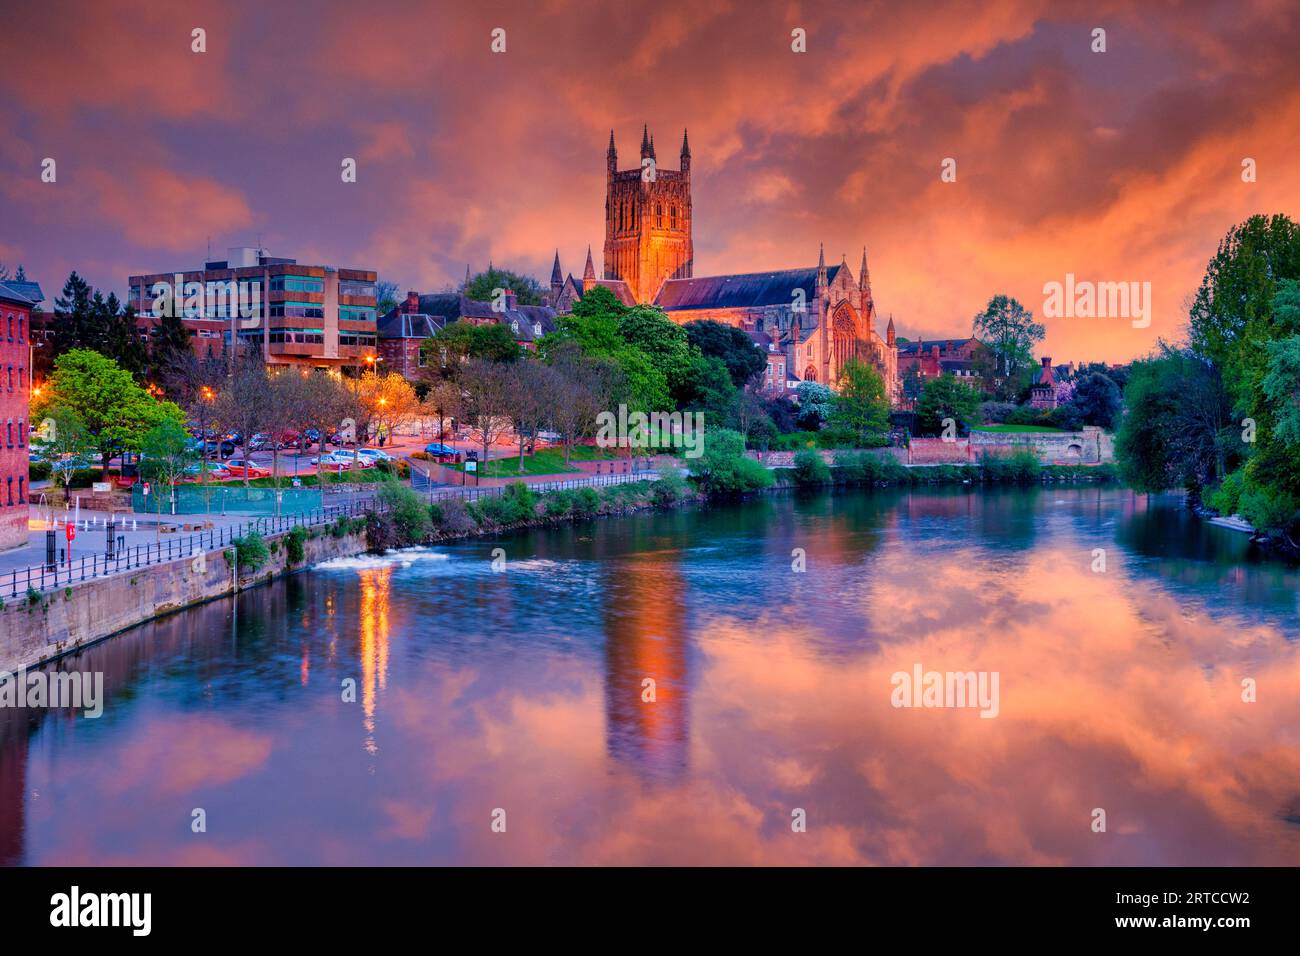 Worcester Cathedral illuminated at twilight with sunset sky and reflection in River Severn Stock Photo